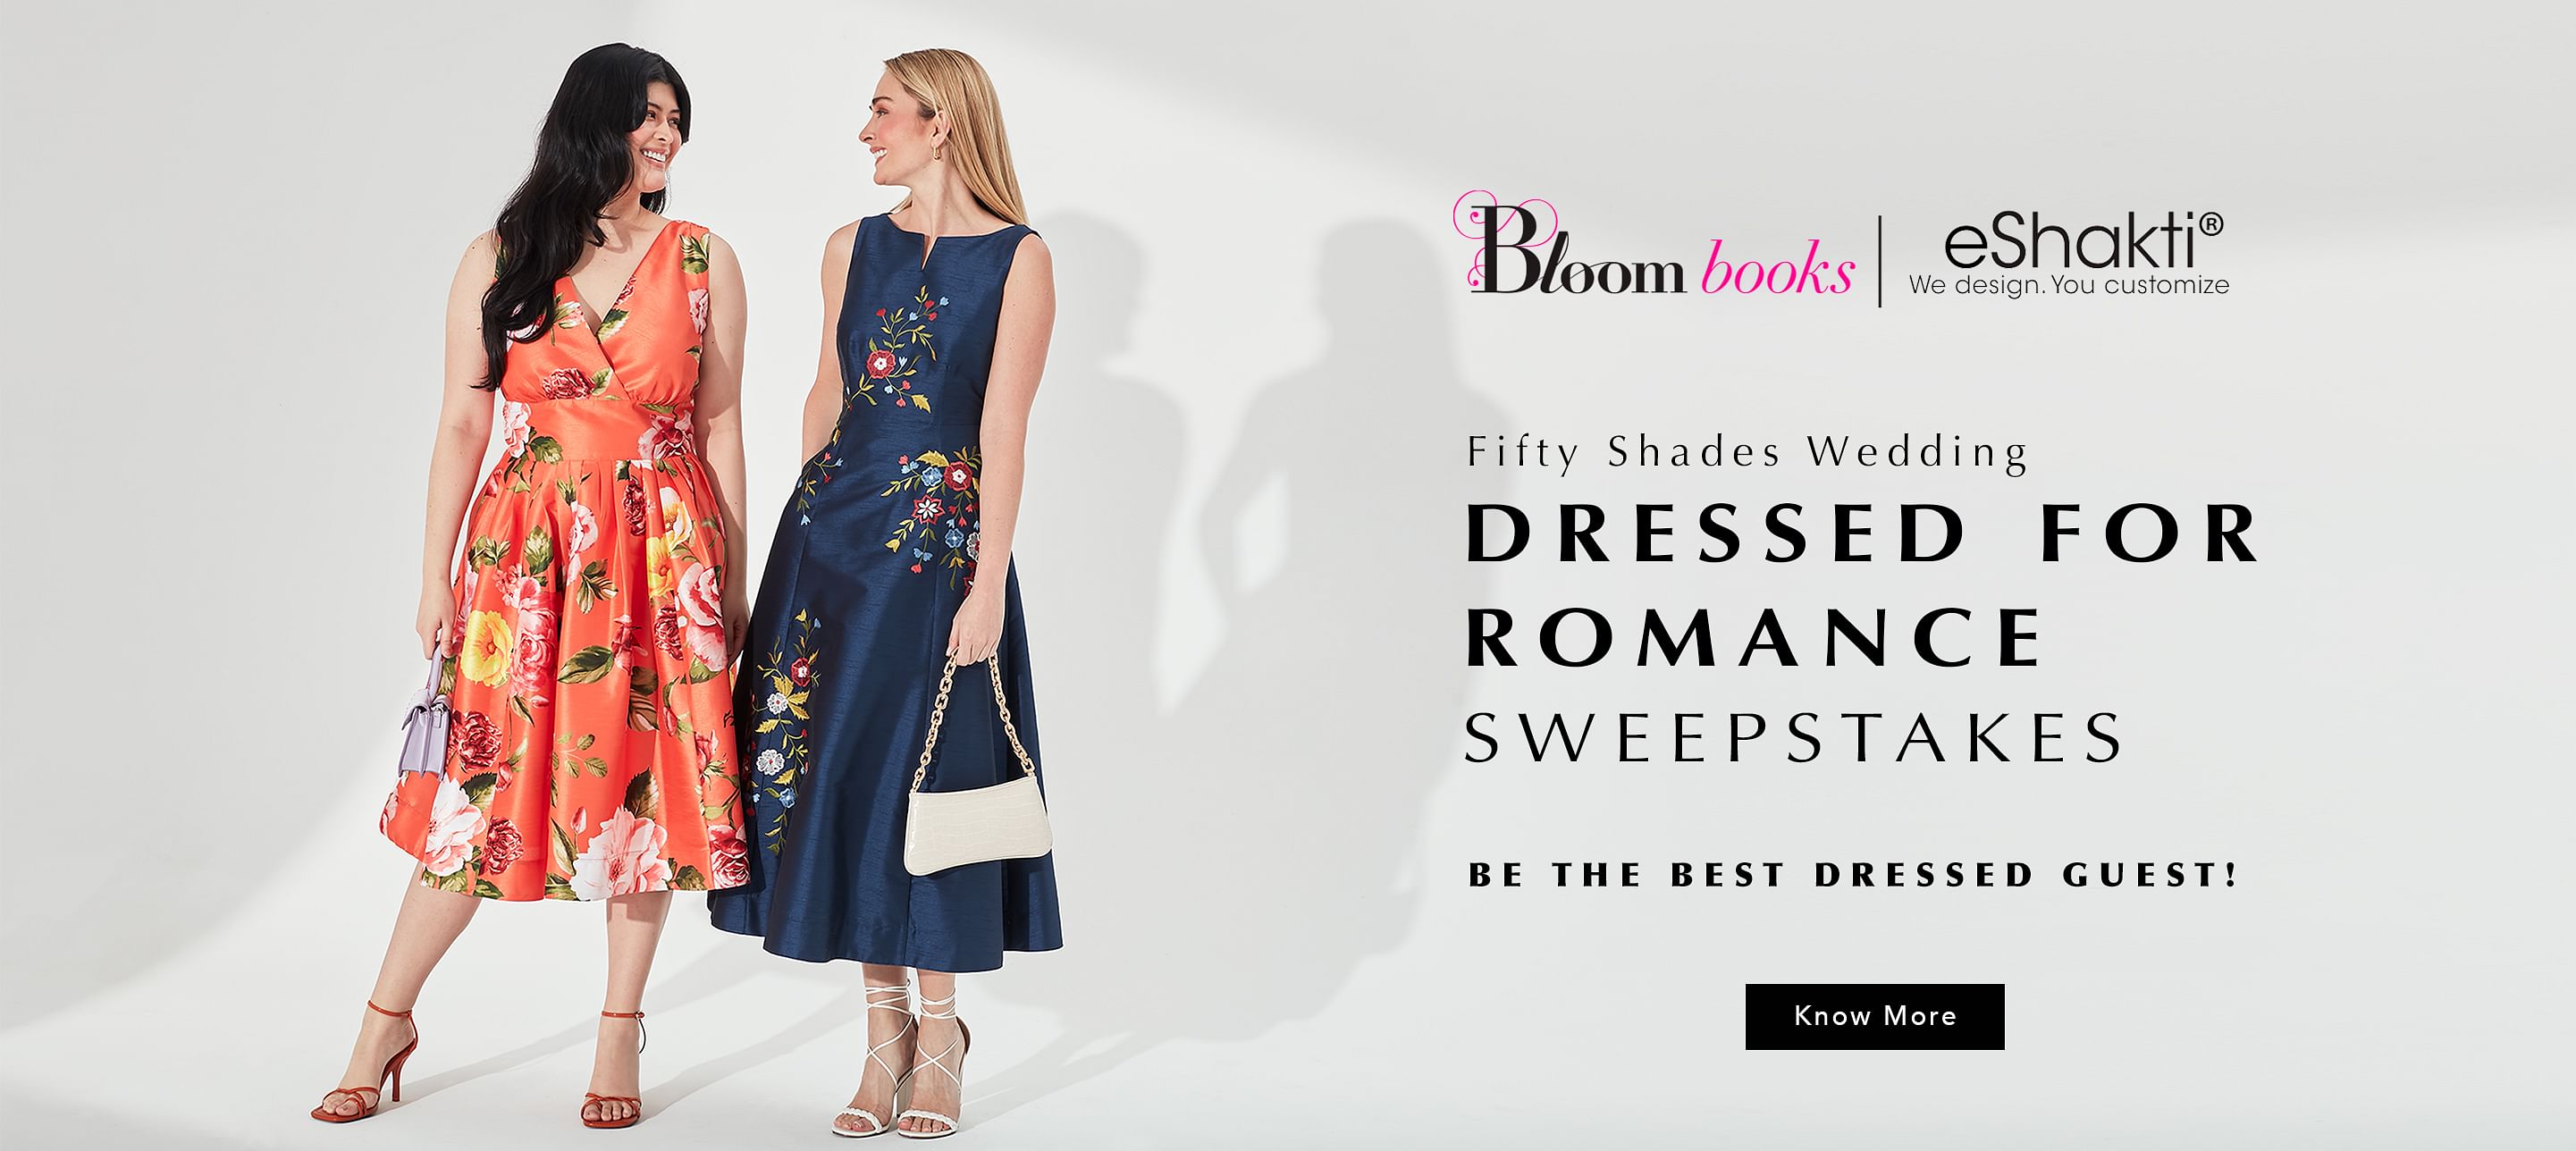 Fifty Shades Wedding. Dresses for Romance. Sweepstakes. BE THE BEST DRESSED GUEST!